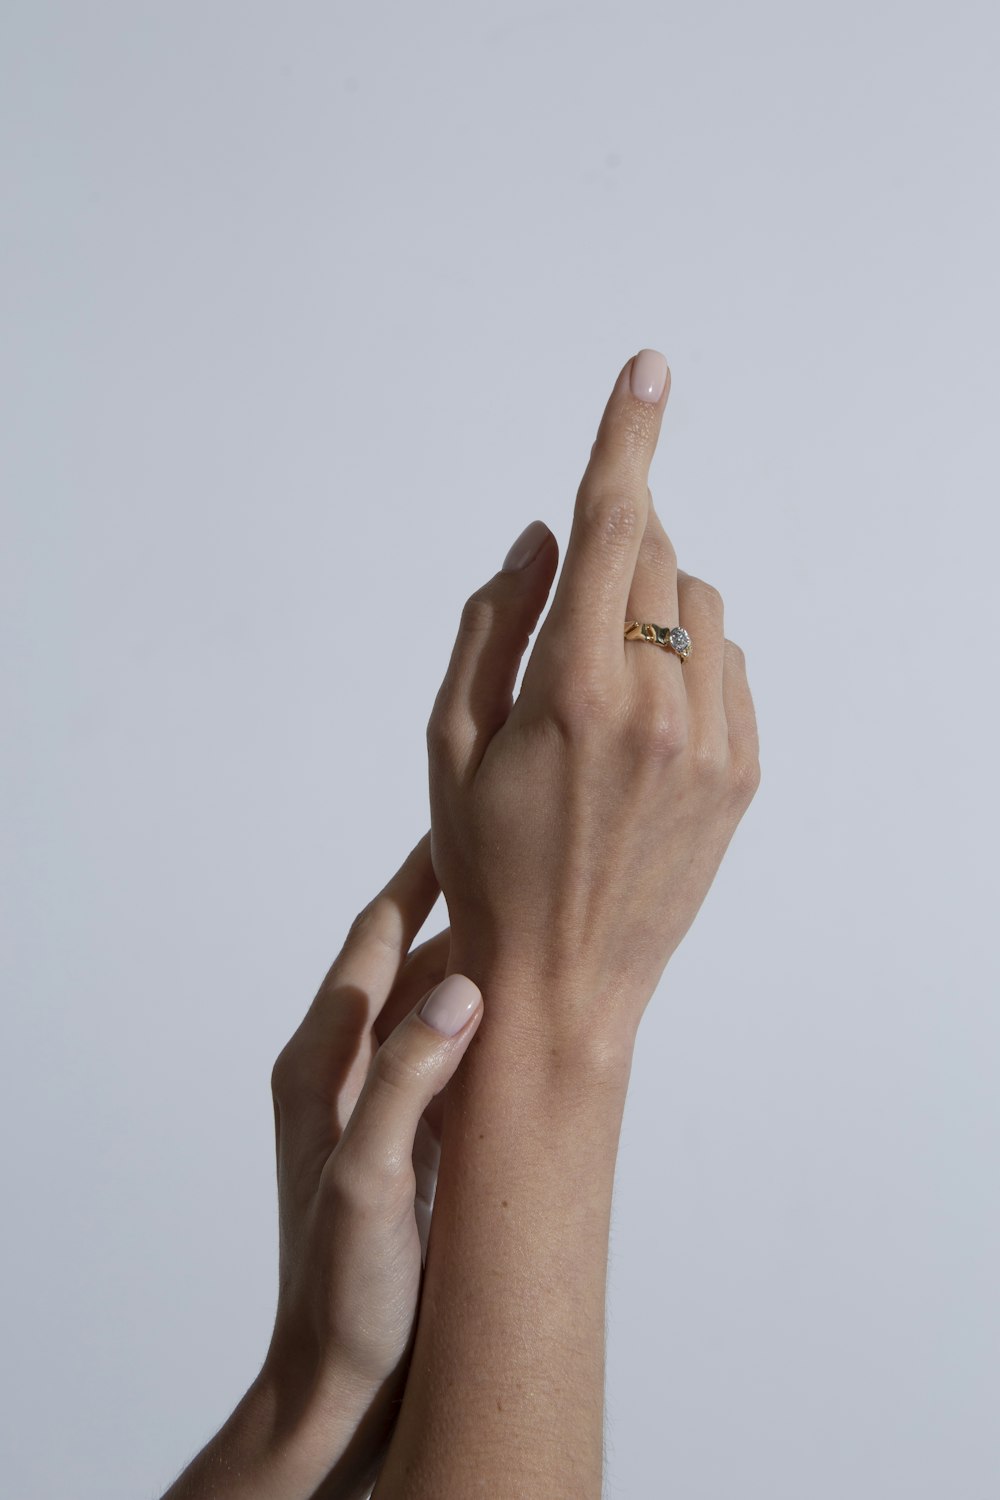 two hands reaching up towards each other with a ring on their finger